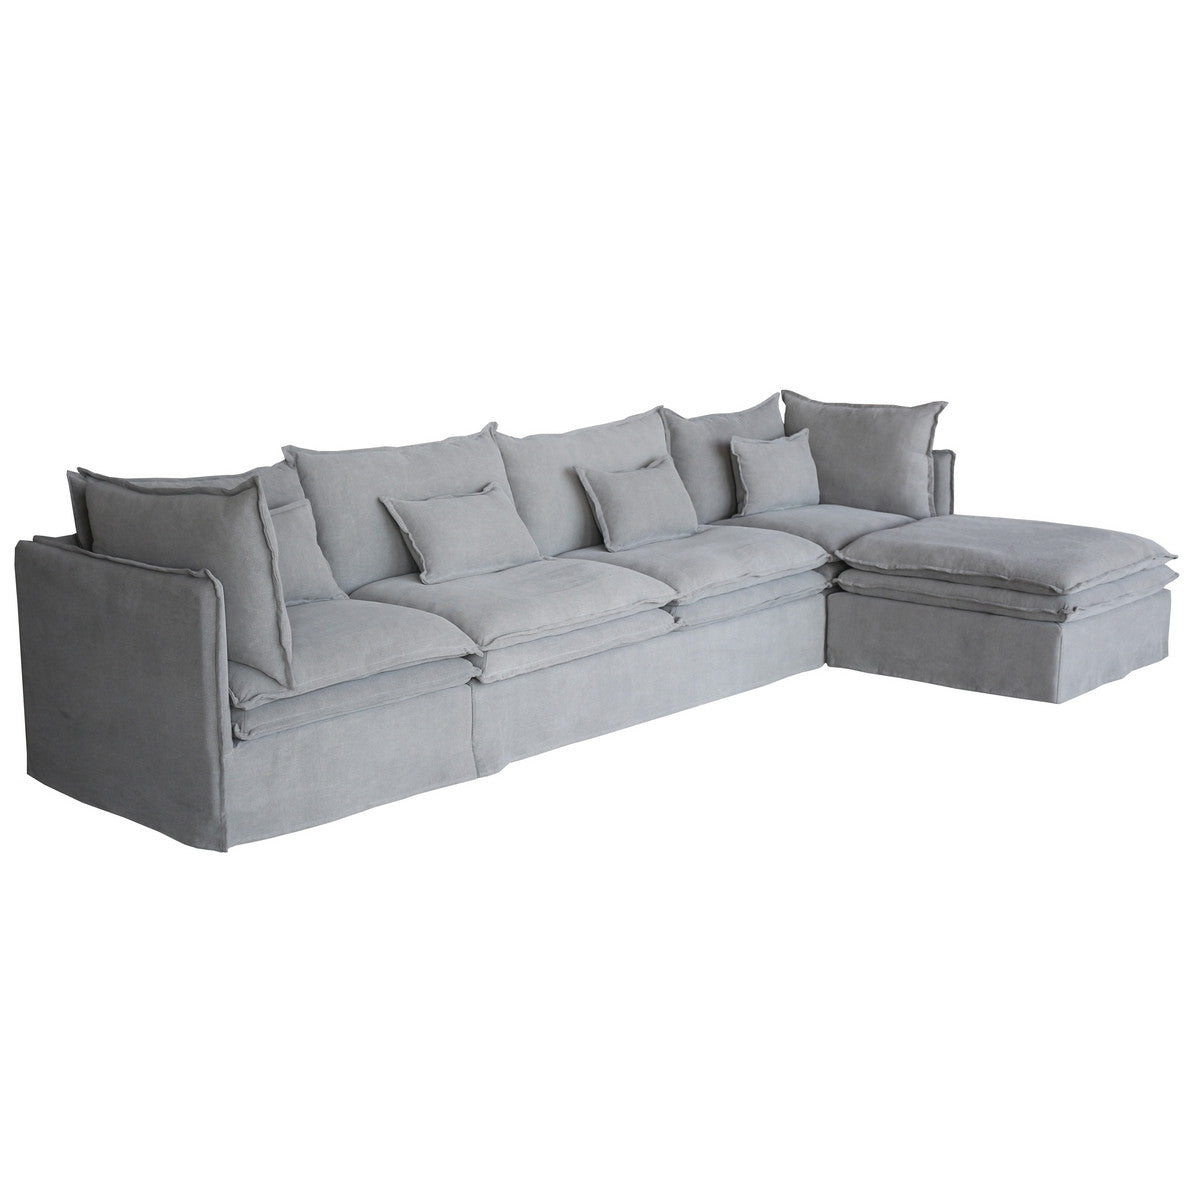 Malta Double Cushion Sectional Middle 2 Seater